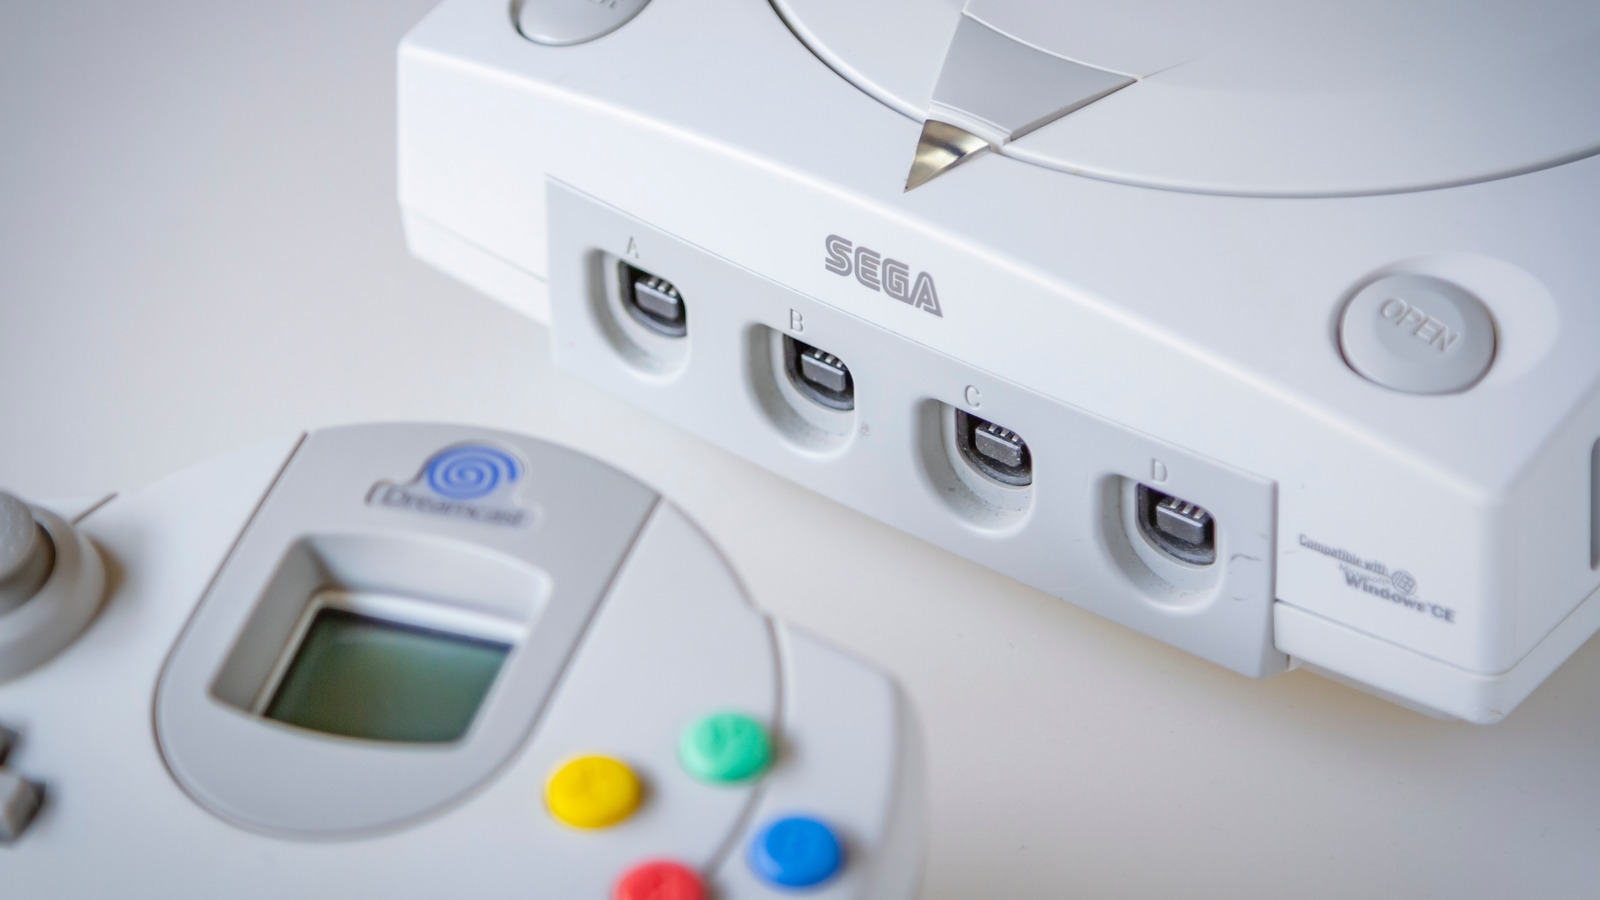 after-over-two-decades-the-sega-dreamcast-is-getting-a-new-upgrade